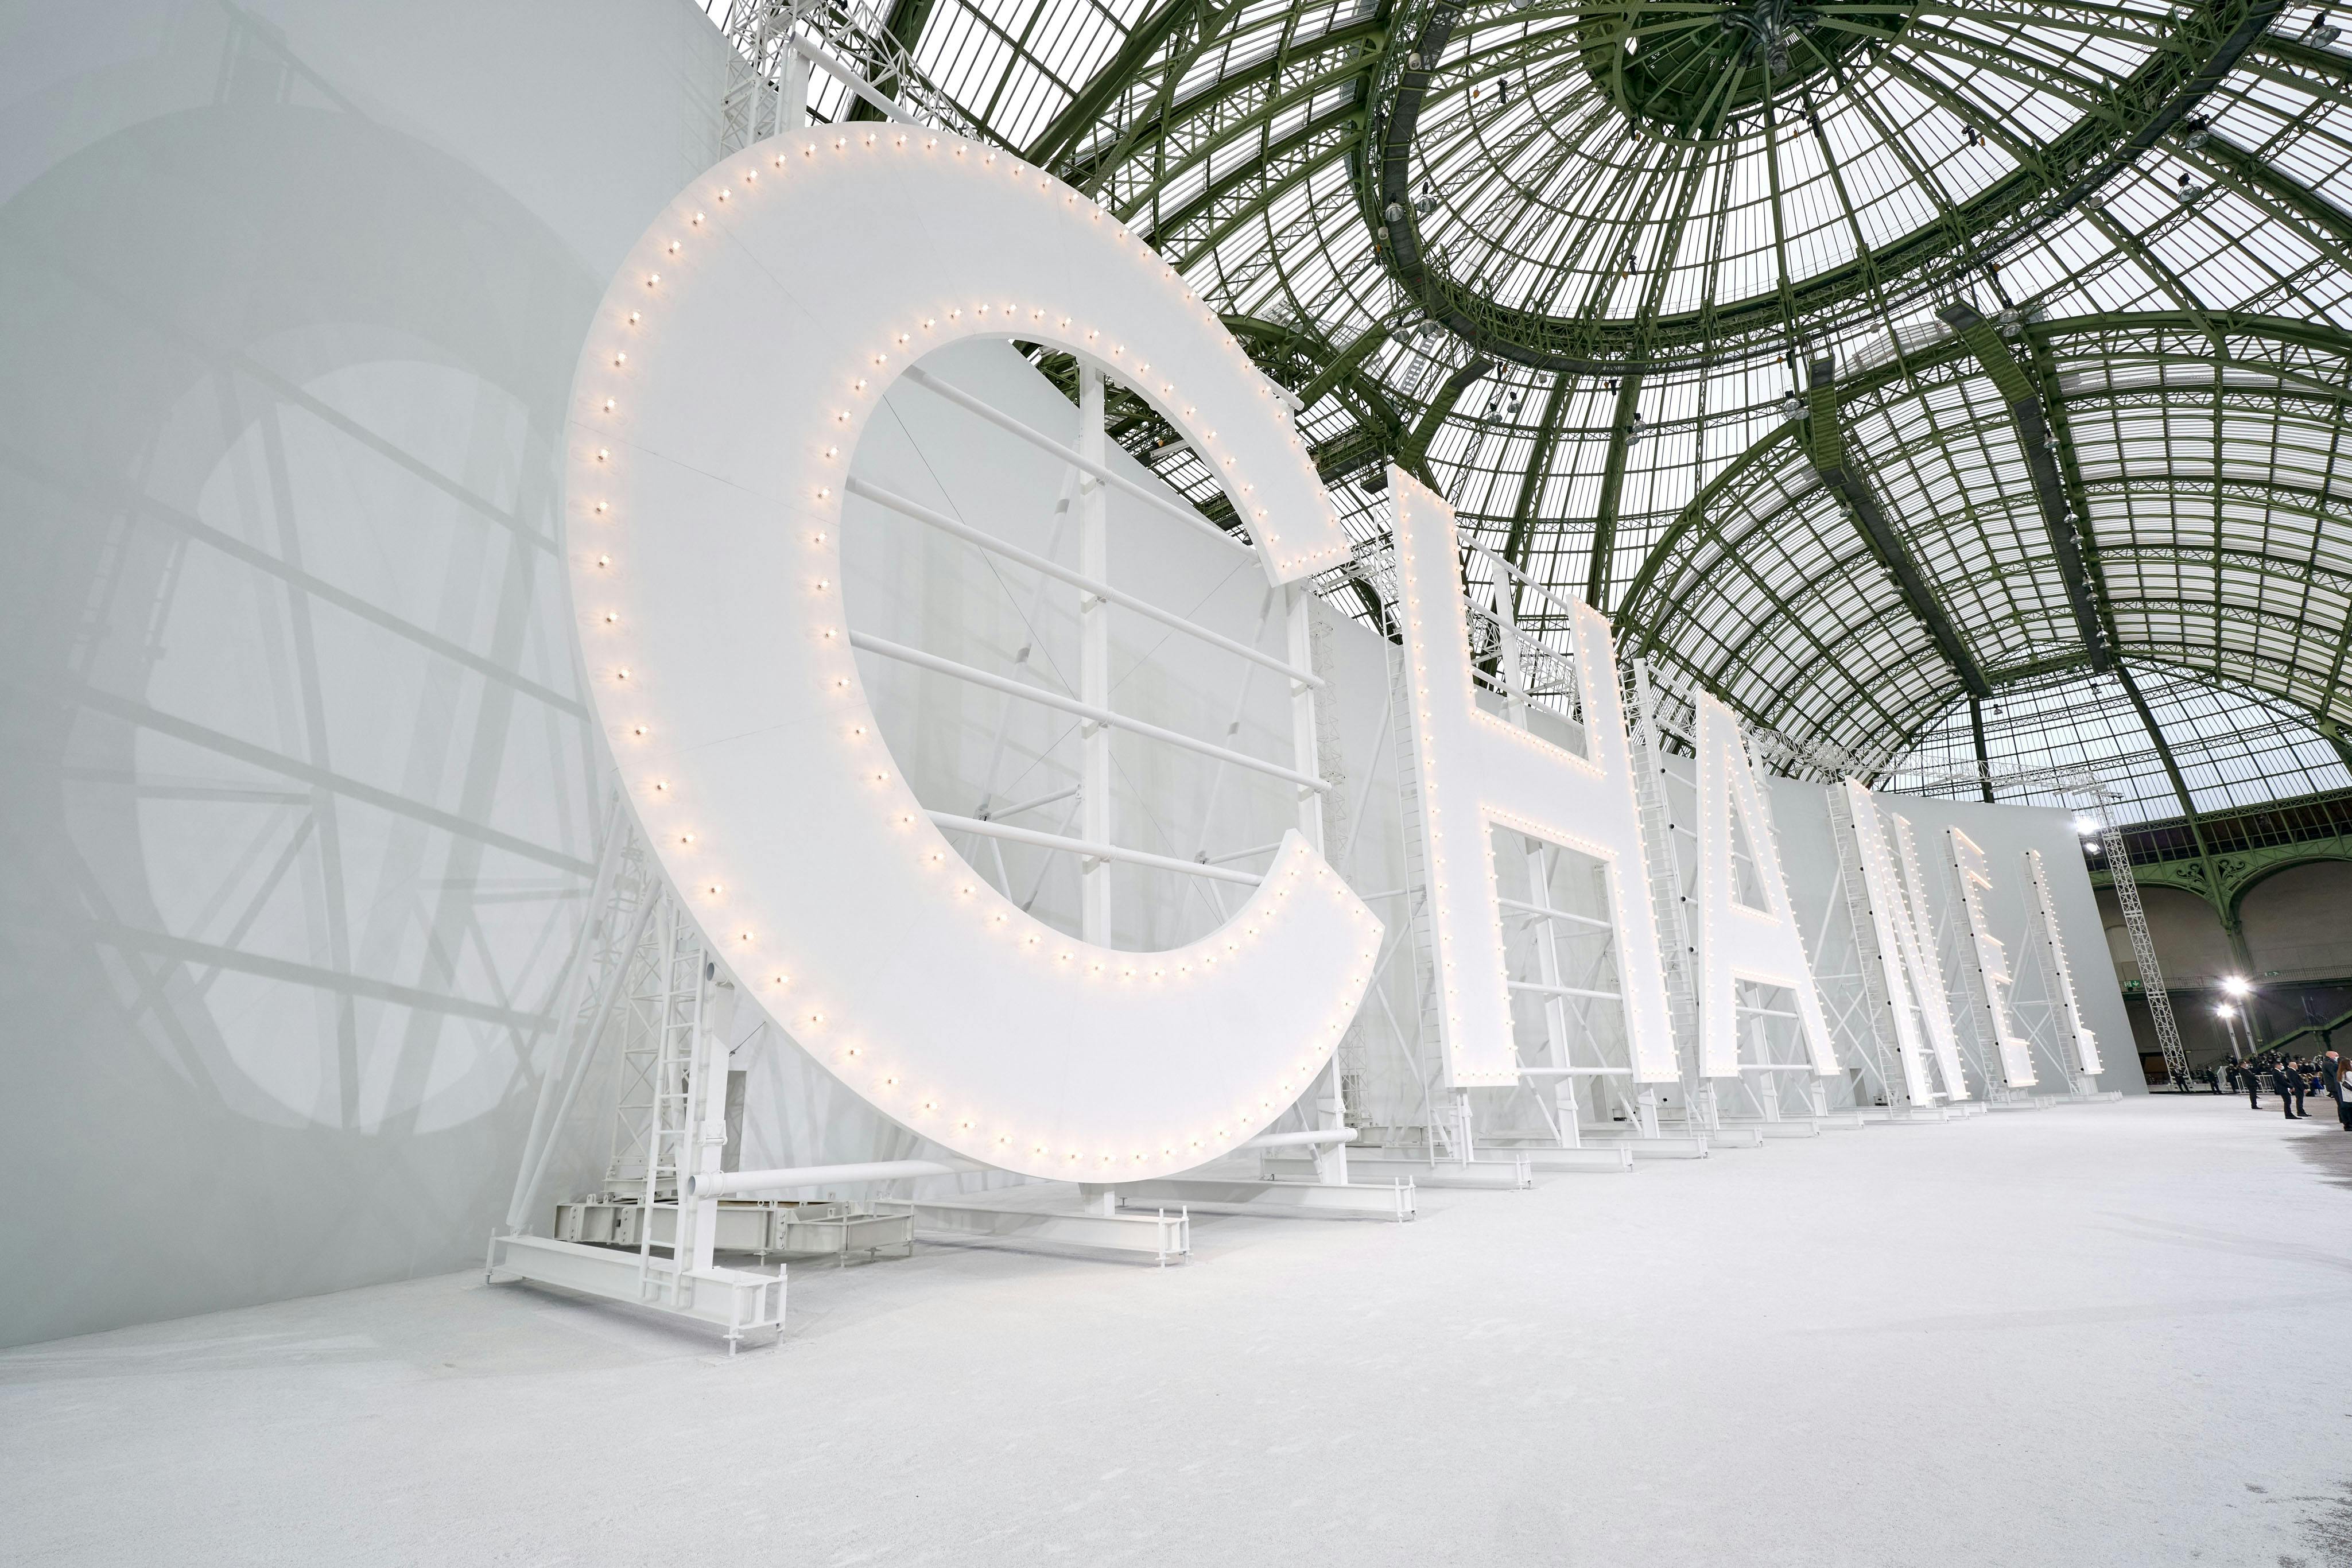 CHANEL SPRING 2021 FASHION SHOW ATMOSPHERE